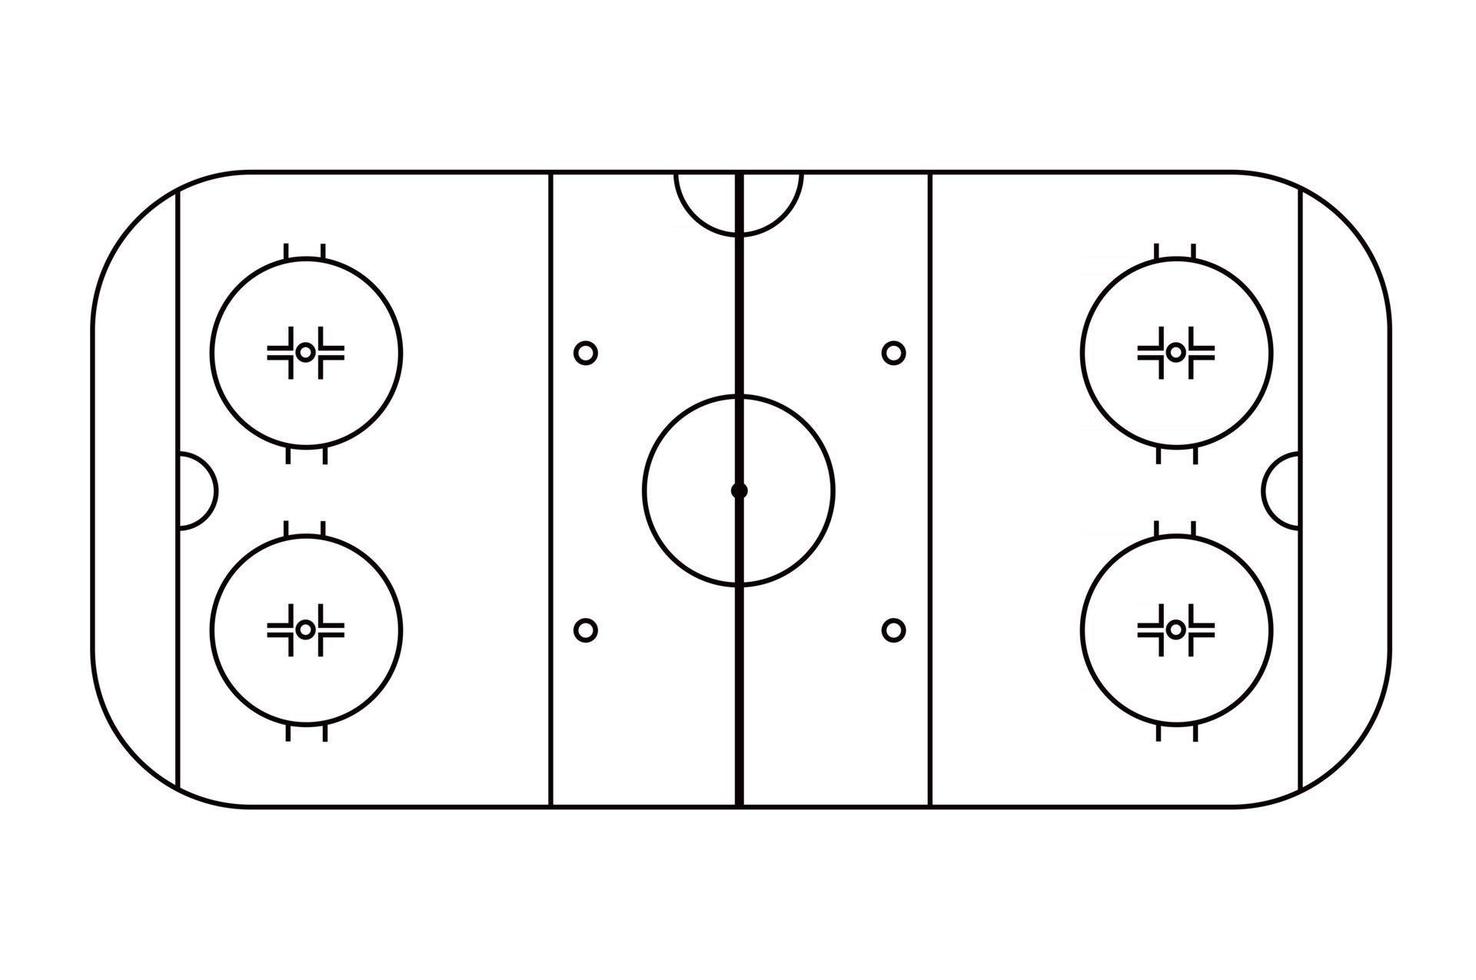 Ice hockey field scheme. View from above. Black and white vector